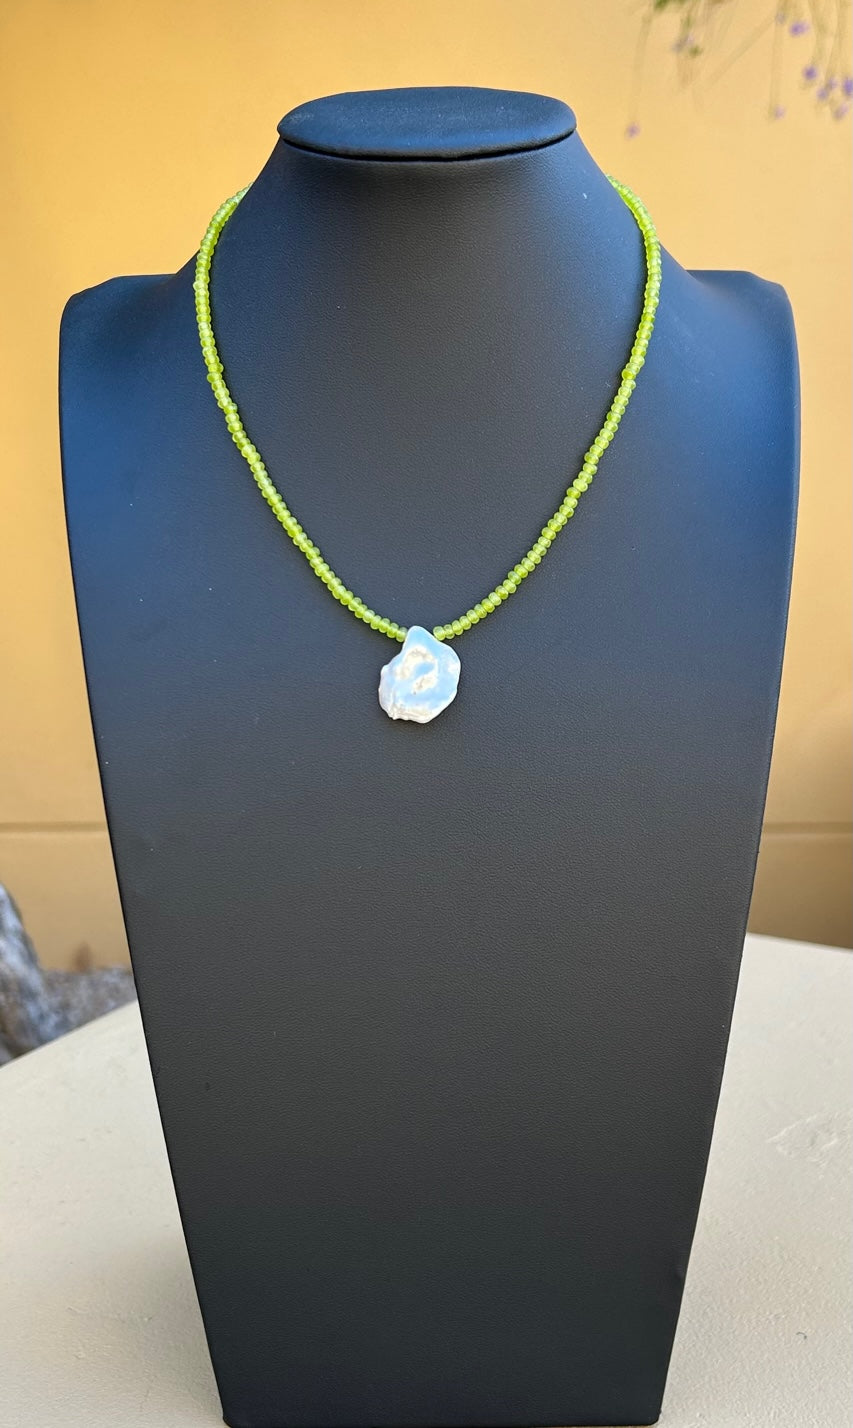 Necklace - 3mm lime green jade with irregular pearl pendant